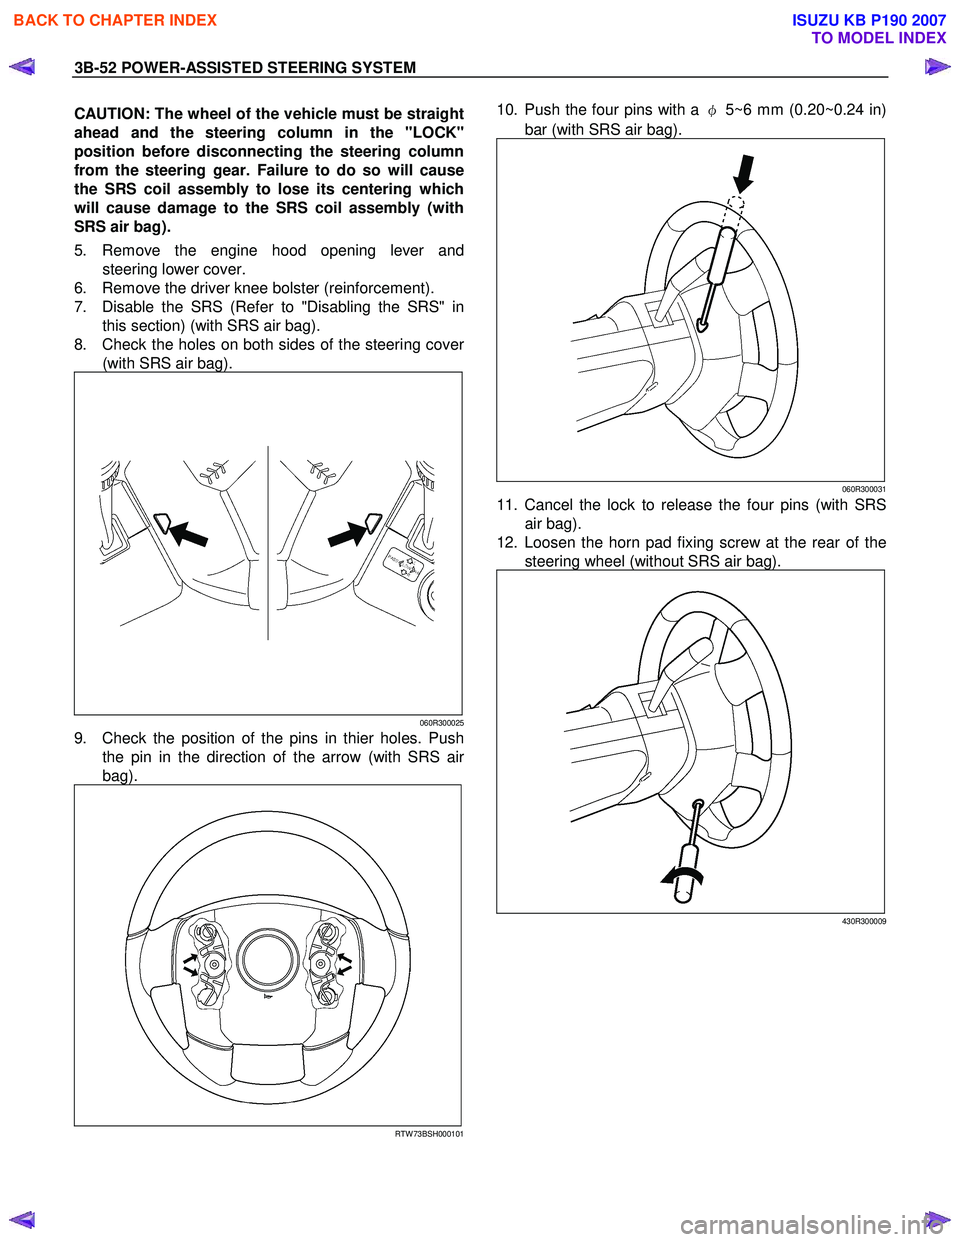 ISUZU KB P190 2007  Workshop Service Manual 3B-52 POWER-ASSISTED STEERING SYSTEM 
CAUTION: The wheel of the vehicle must be straight 
ahead and the steering column in the "LOCK"
position before disconnecting the steering column
from the steerin